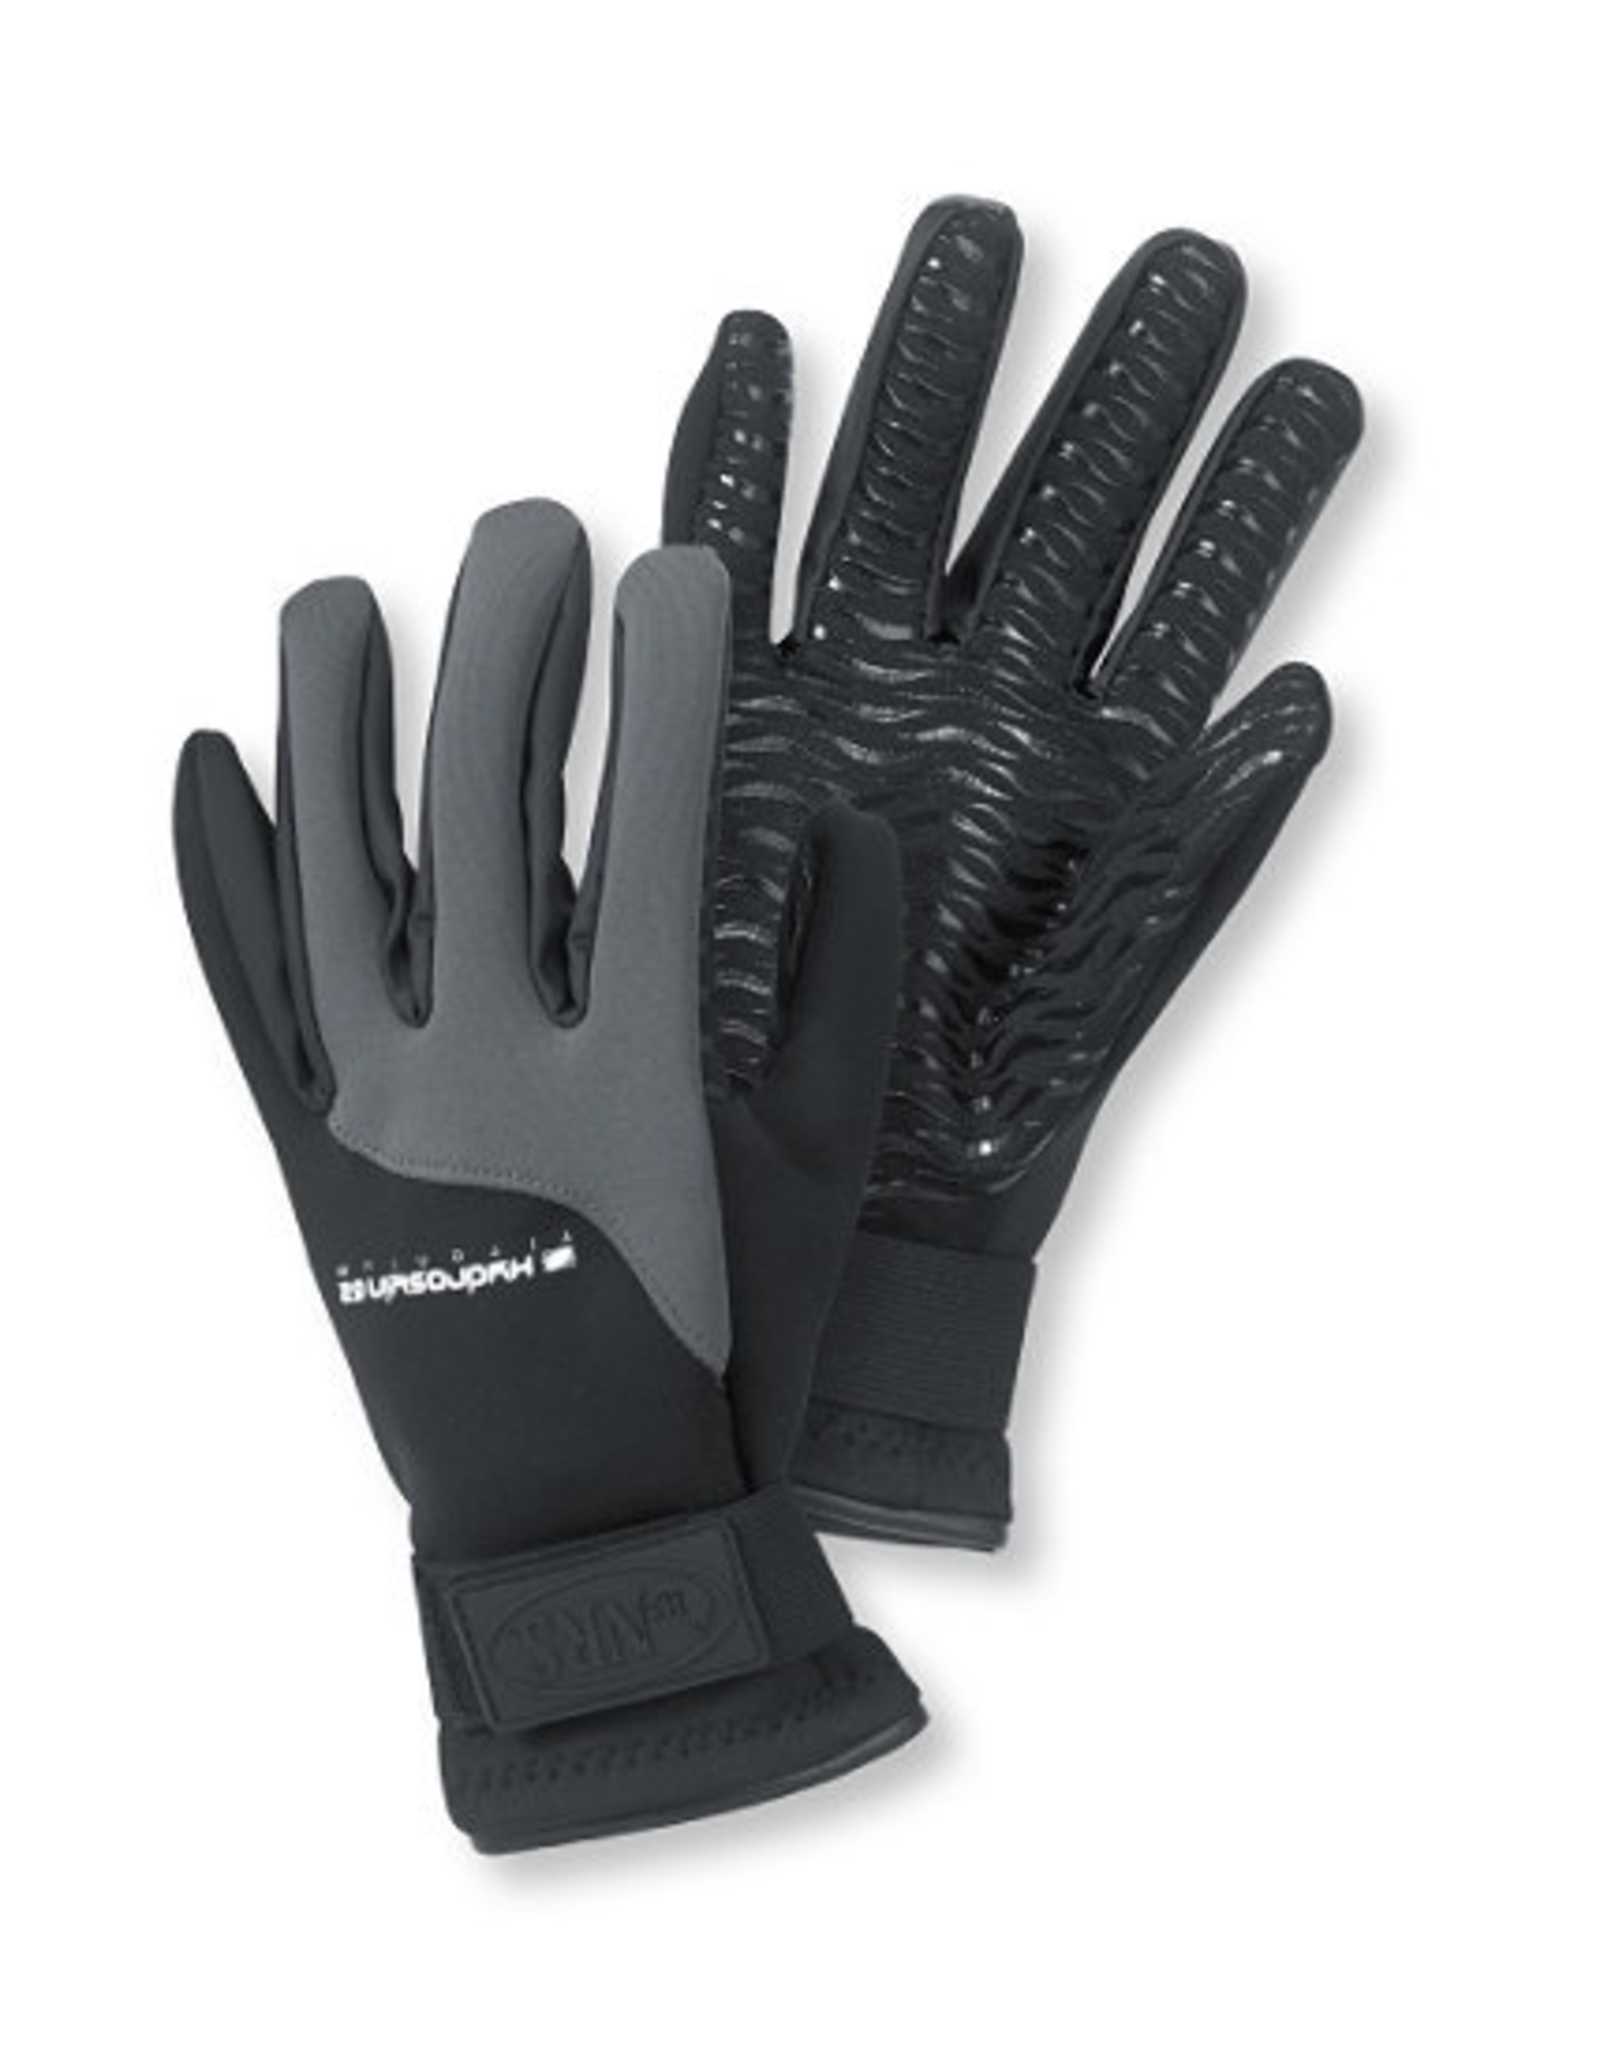 NRS NRS HydroSkin Gloves